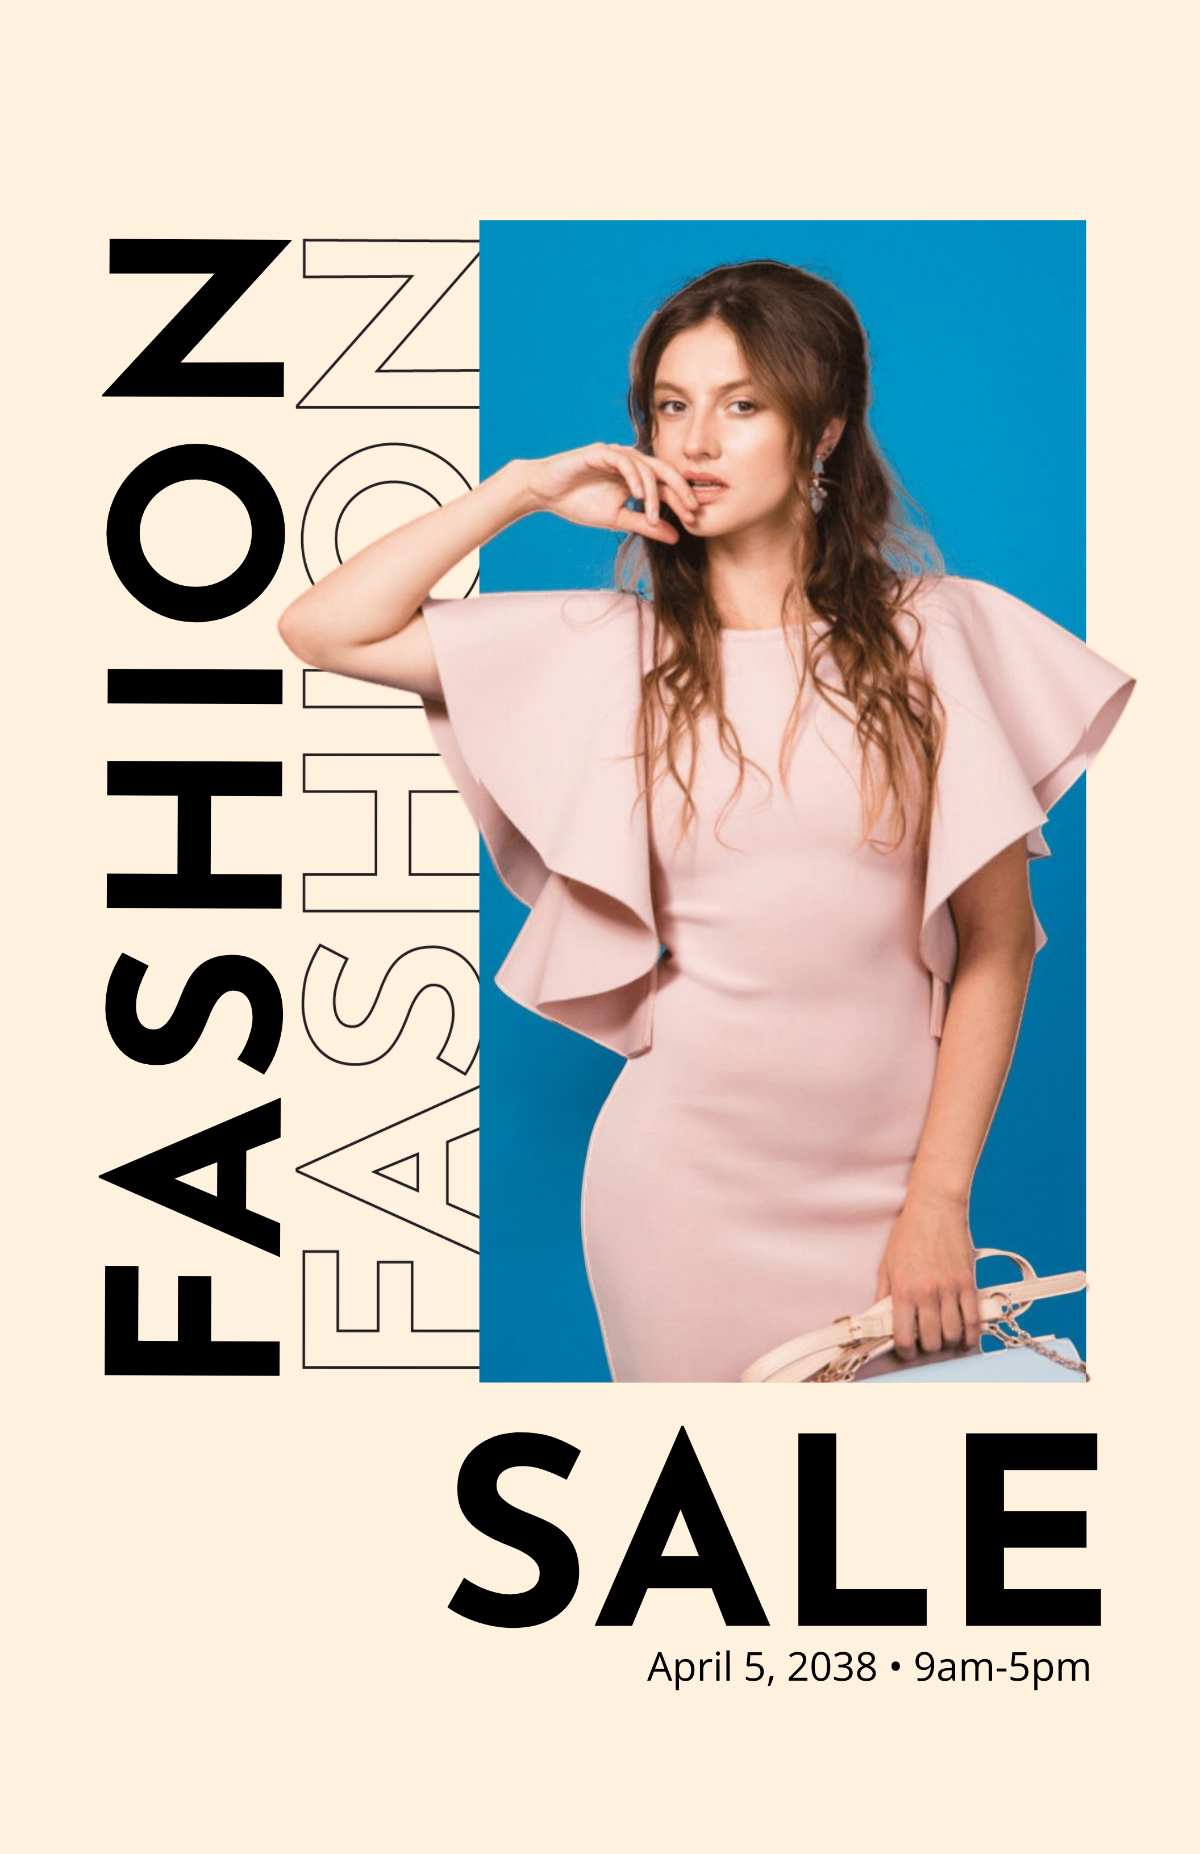 Fashion Sale Poster Template